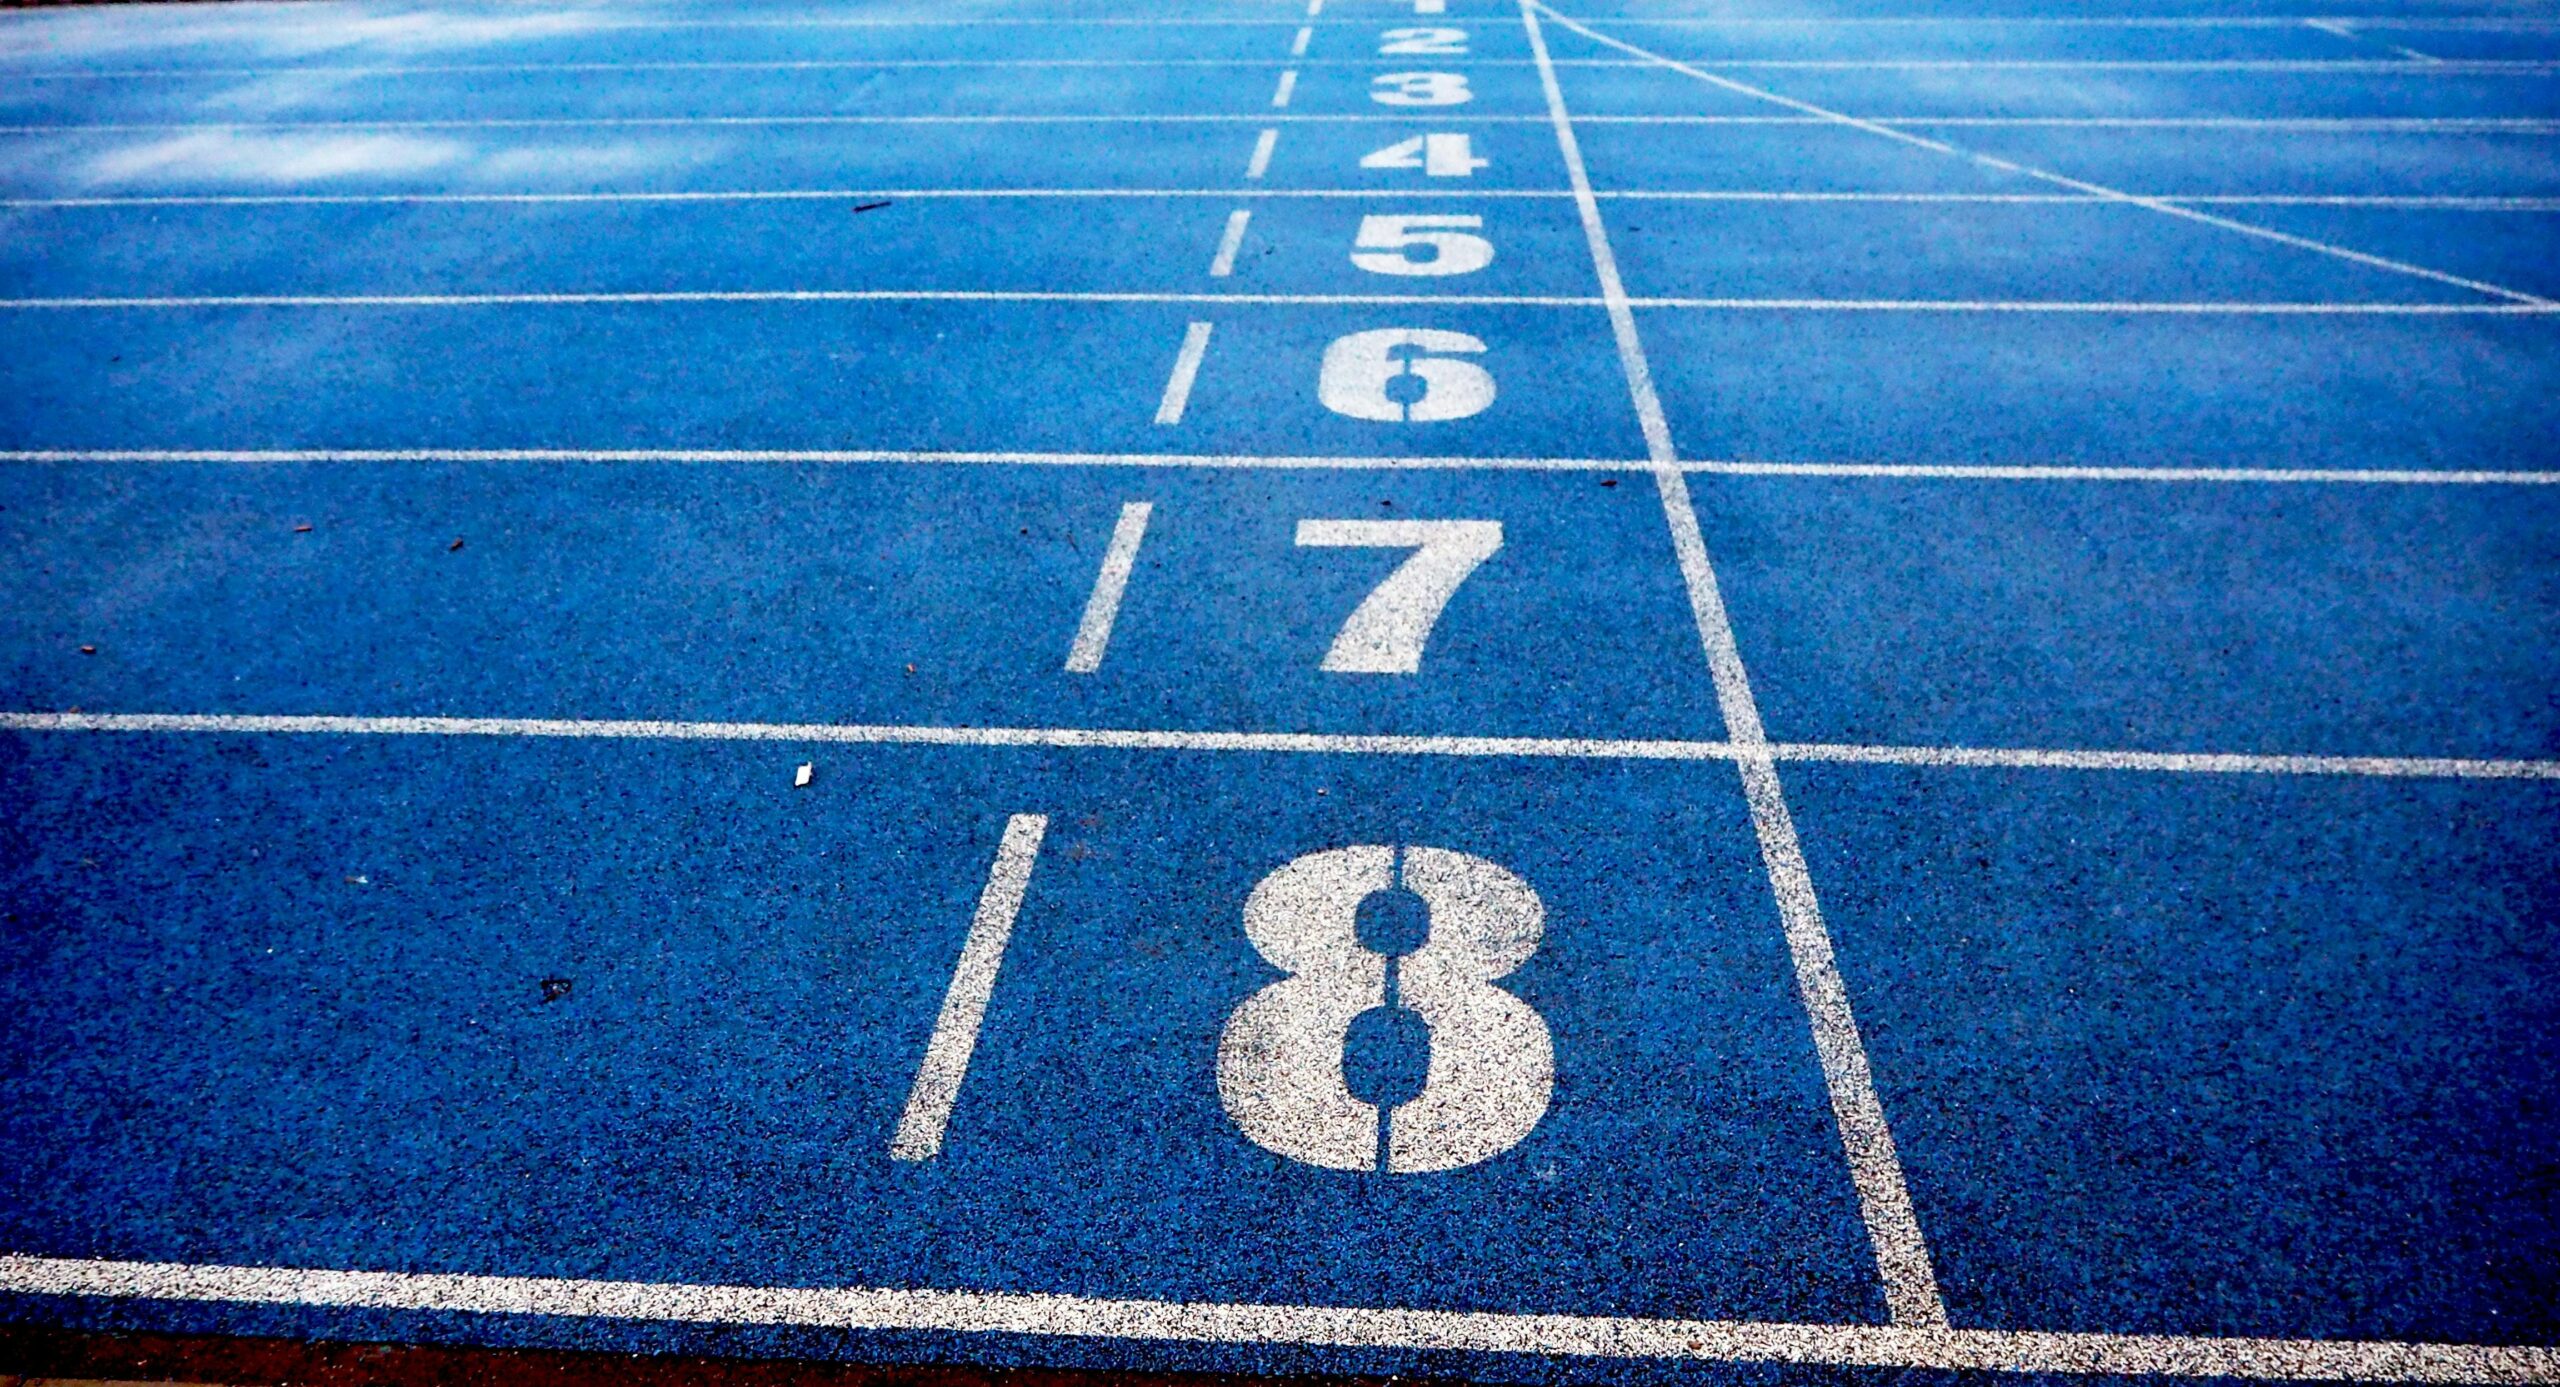 image of the track and field running lanes